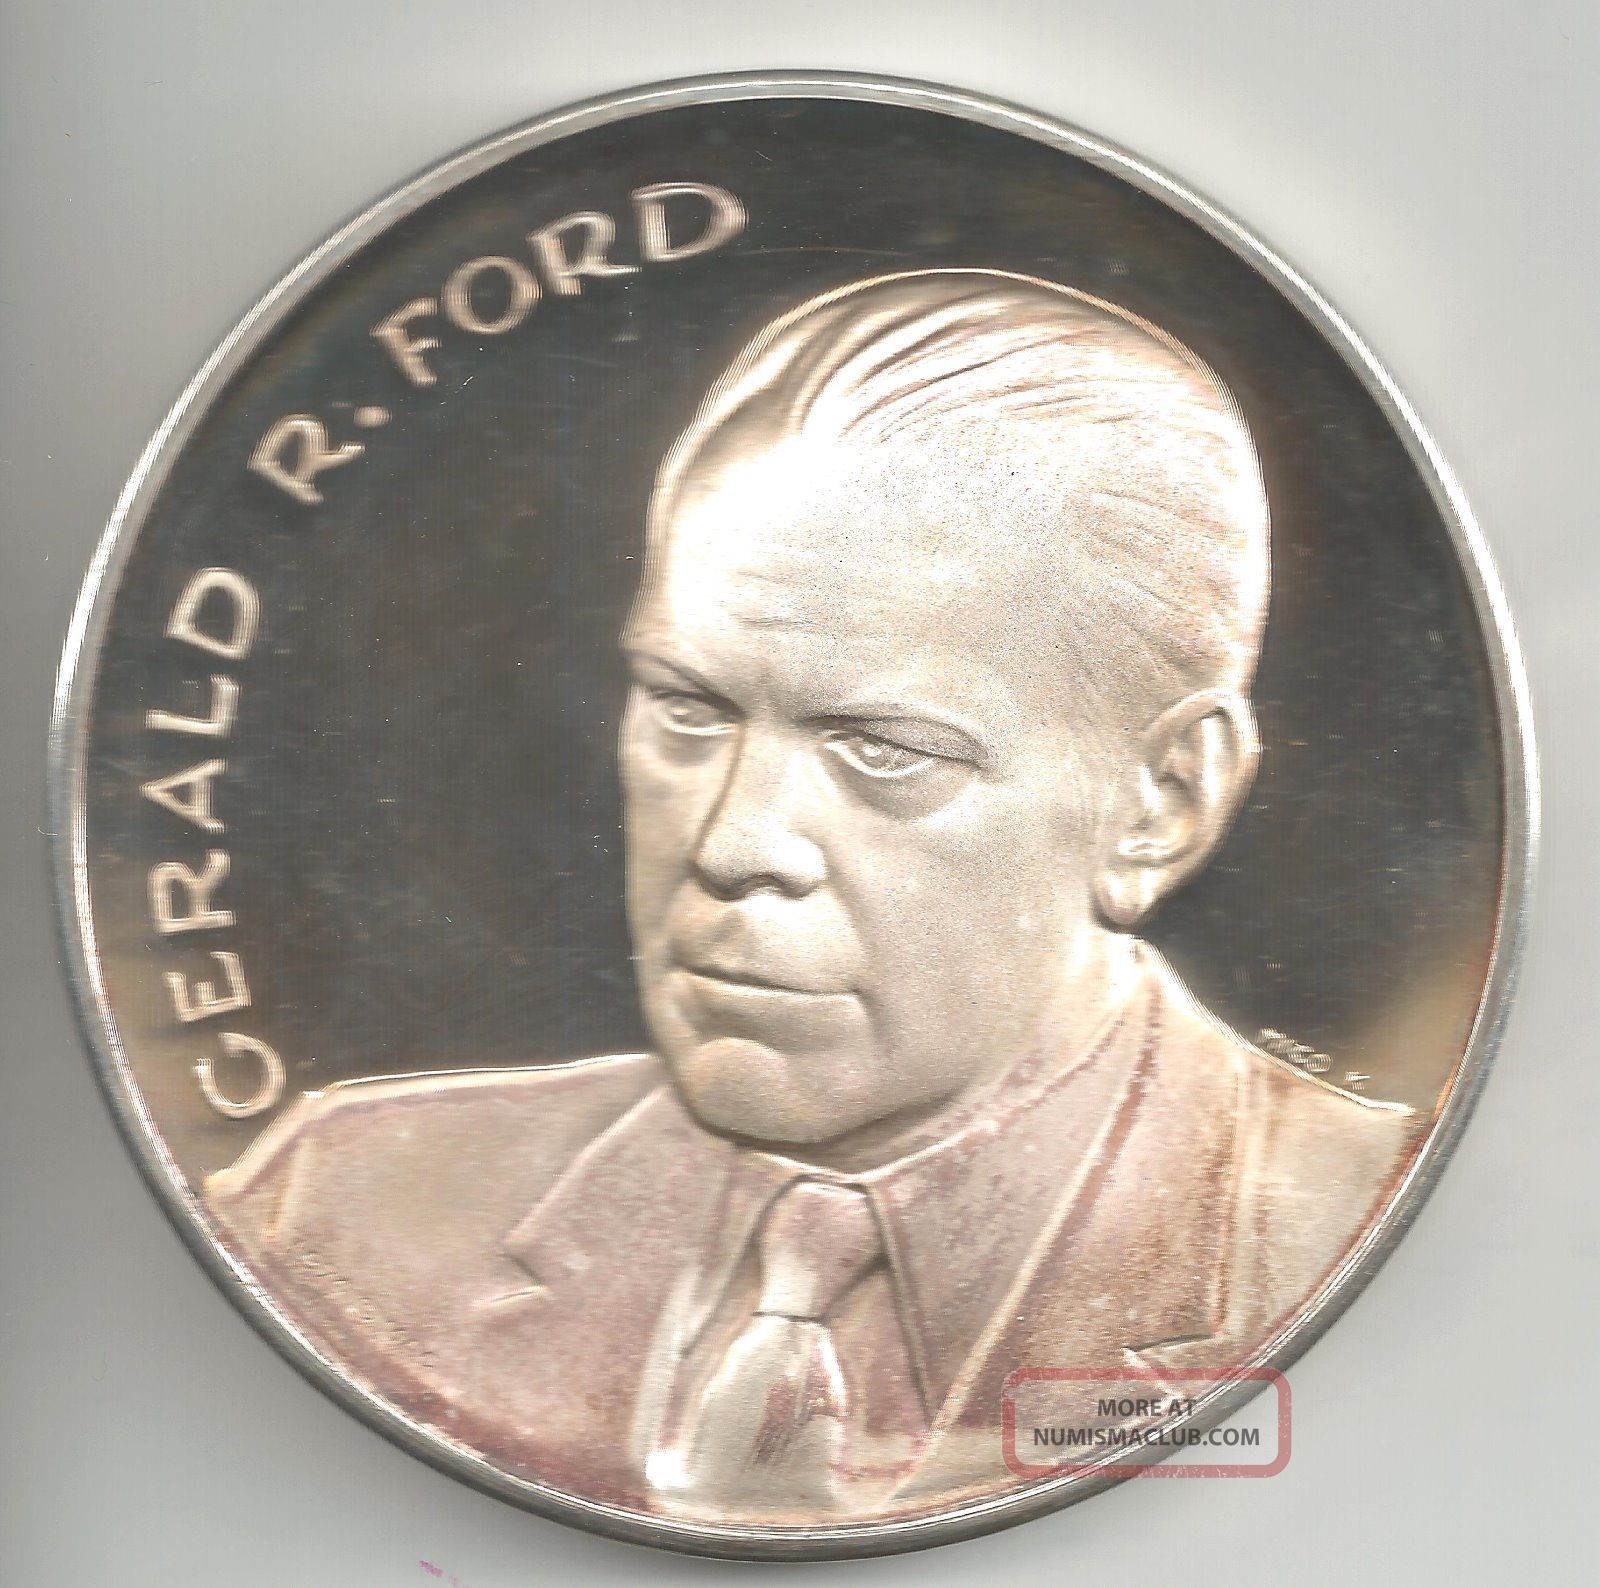 Gerald ford inauguration medal #2